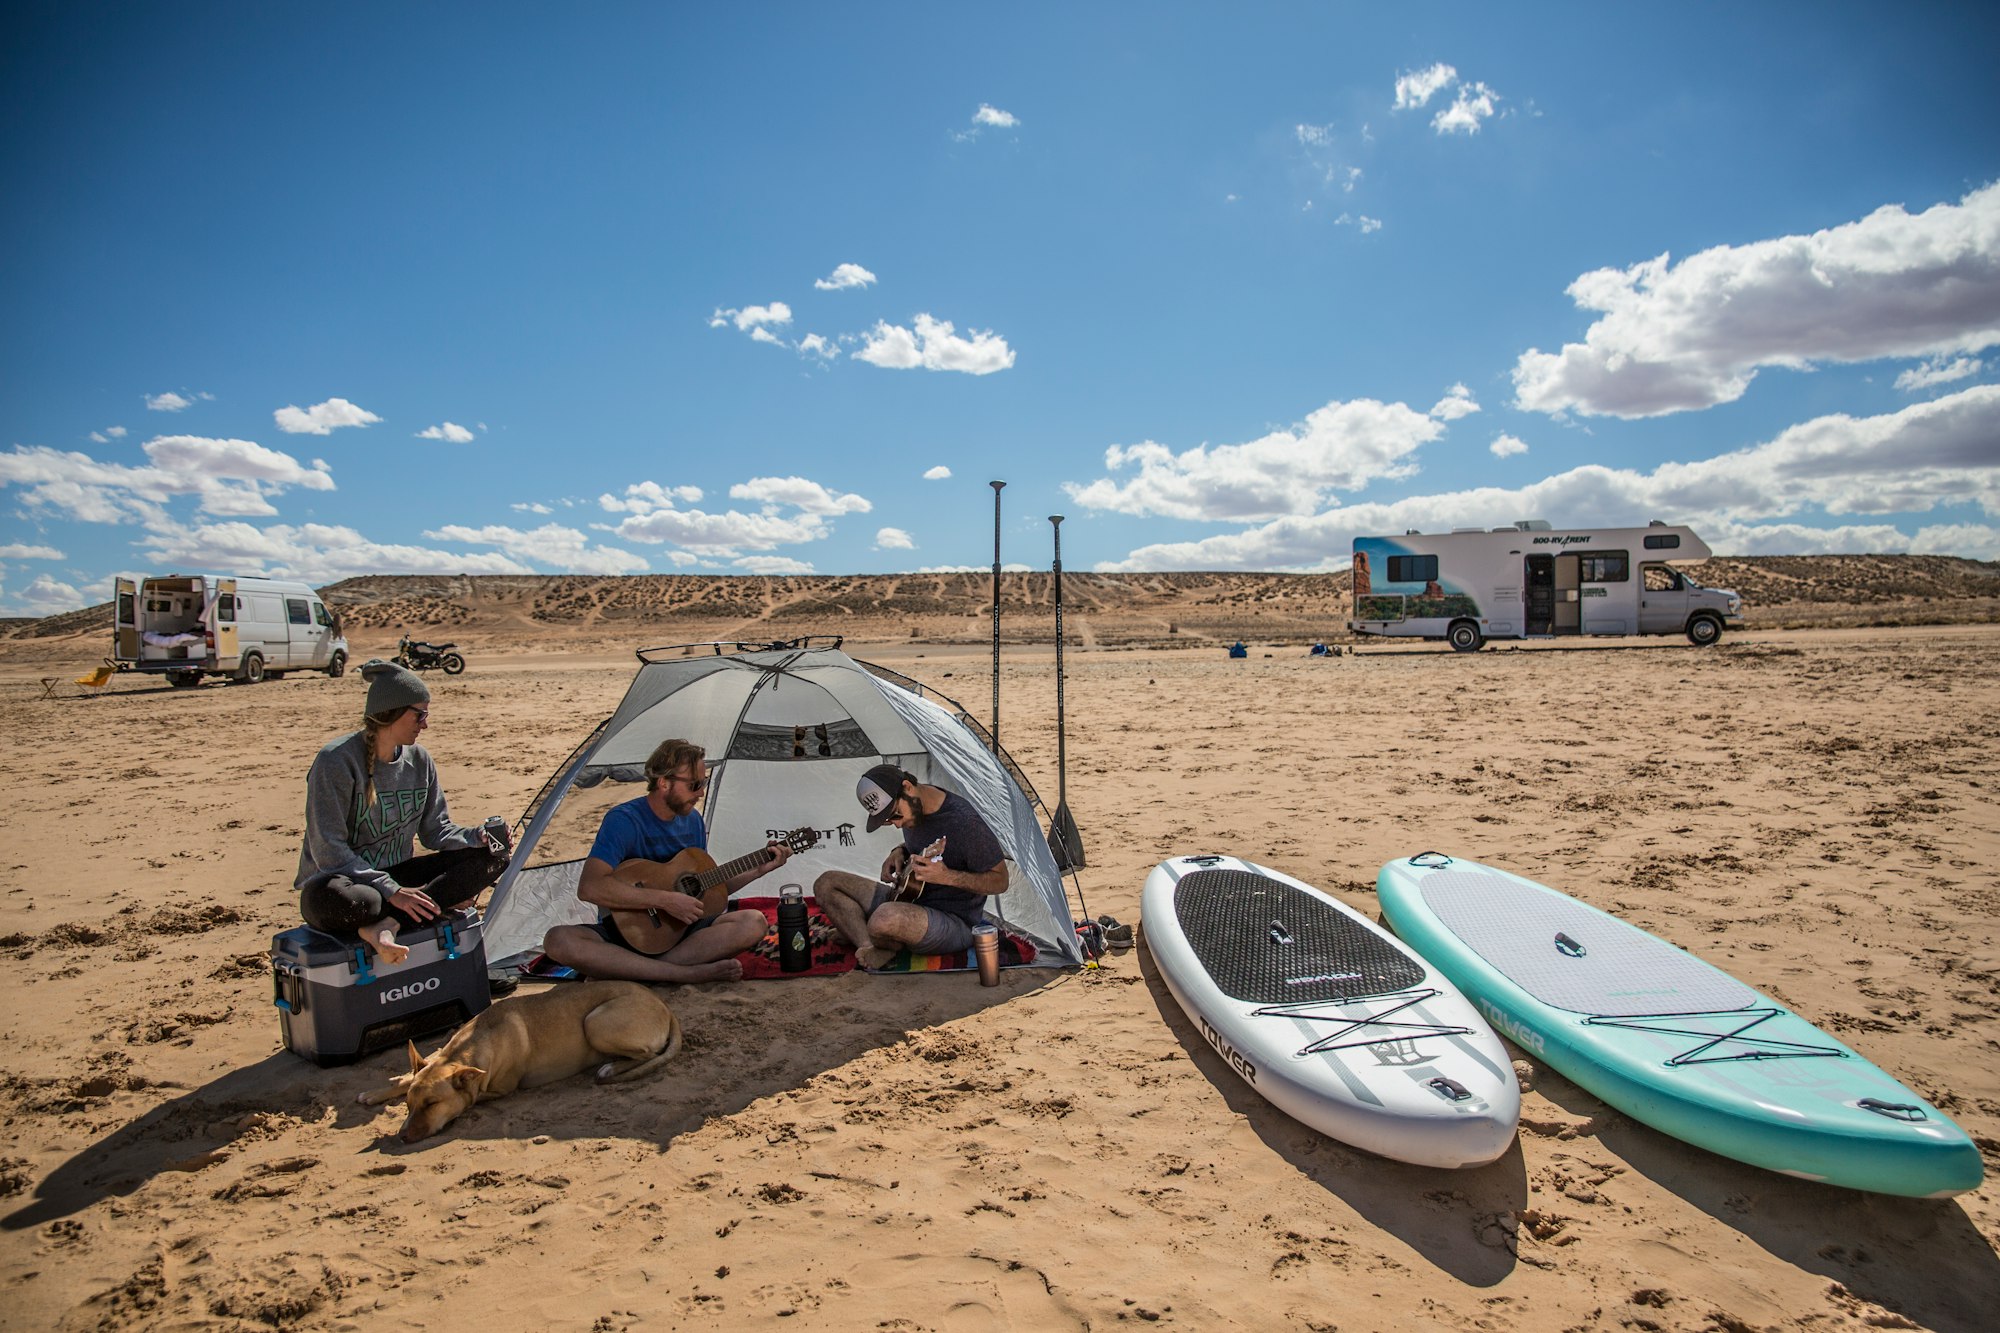 Camping in the desert with some Tower paddleboards. 